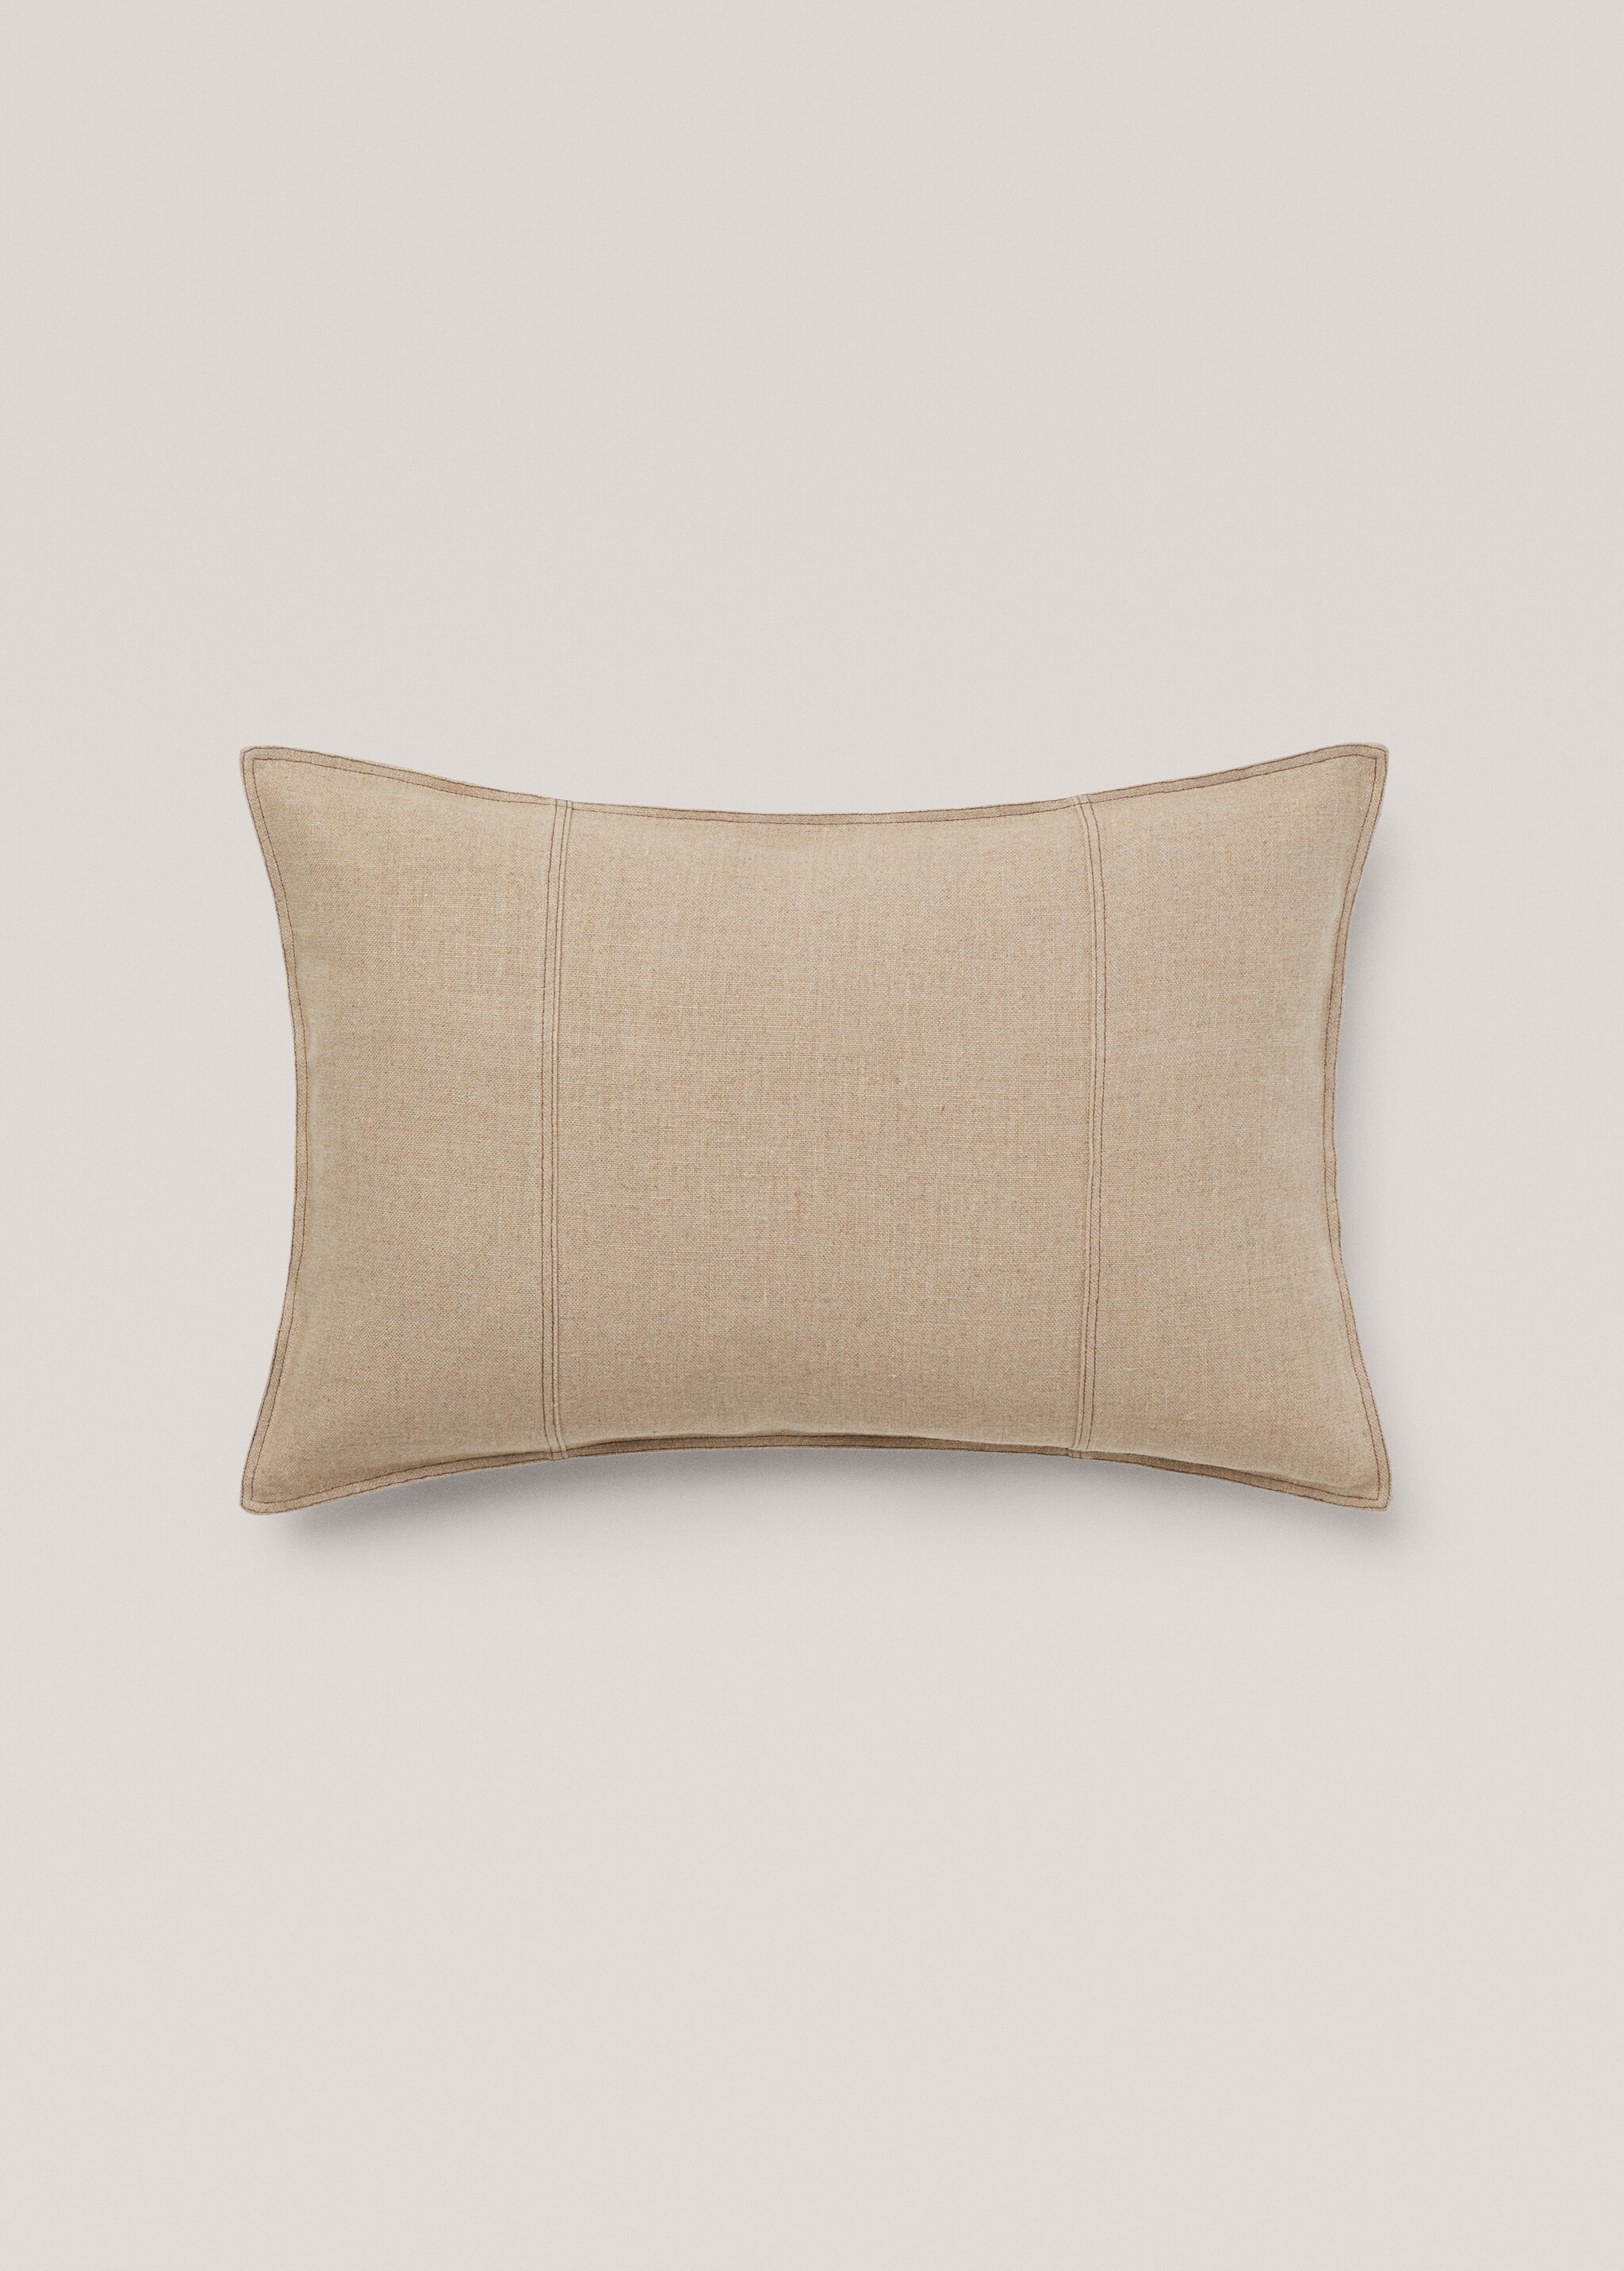 100% linen stitched cushion cover 40x60cm - Article without model